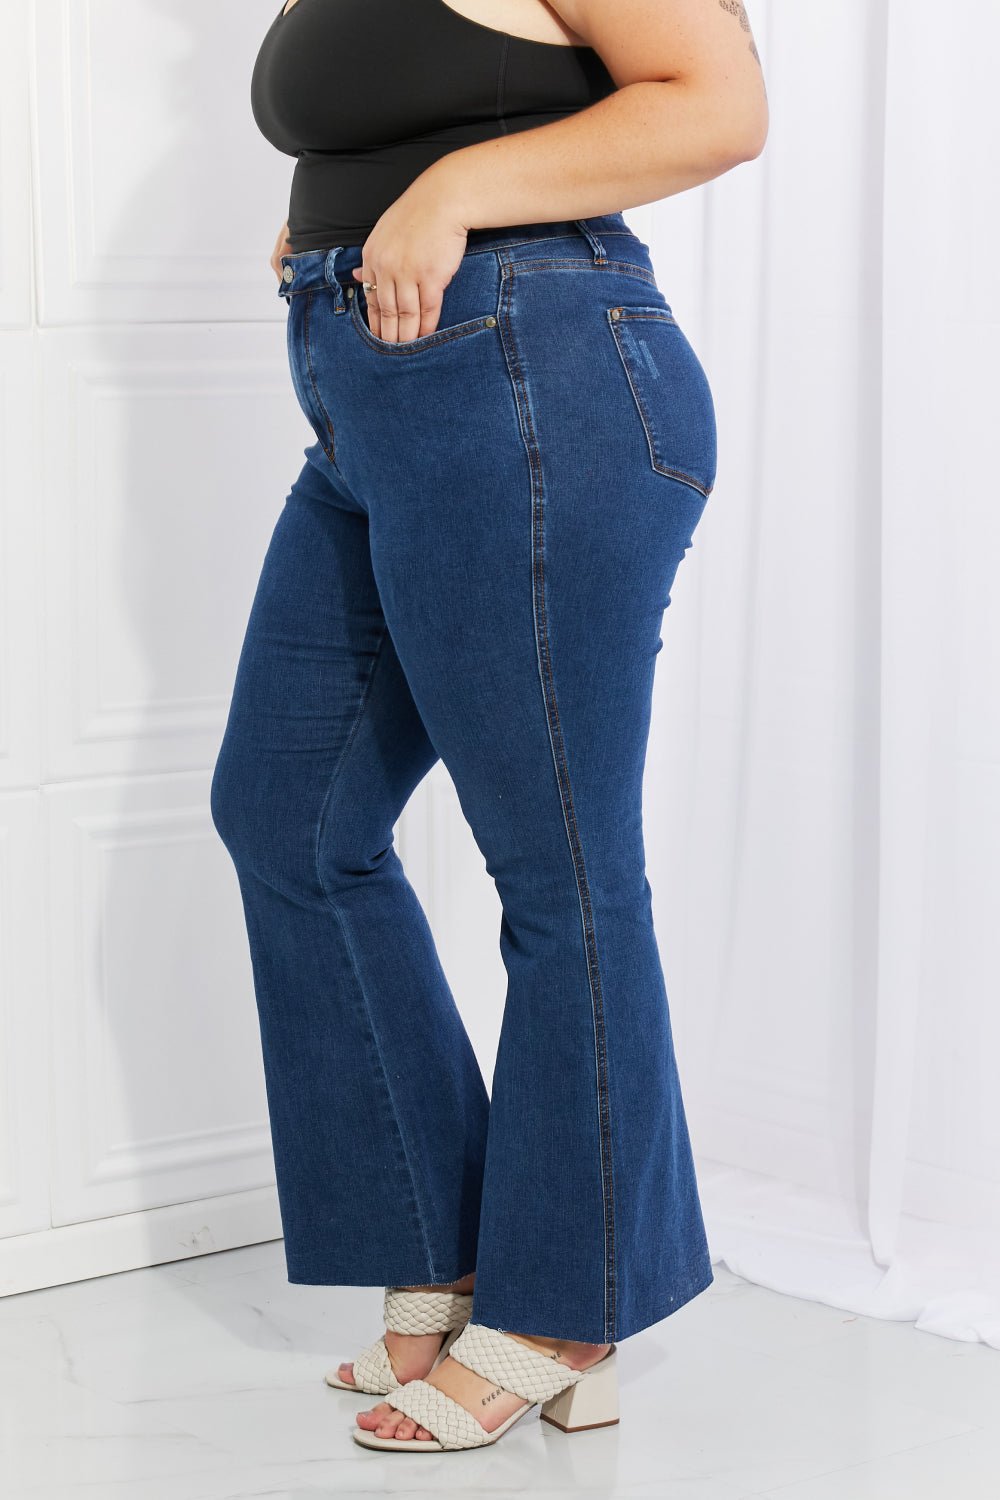 Ava Full Size Cool Denim Tummy Control Flare - Embrace Your Curves with Sensuality and Grace - Indulge in a Summer Love Story. - Guy Christopher 